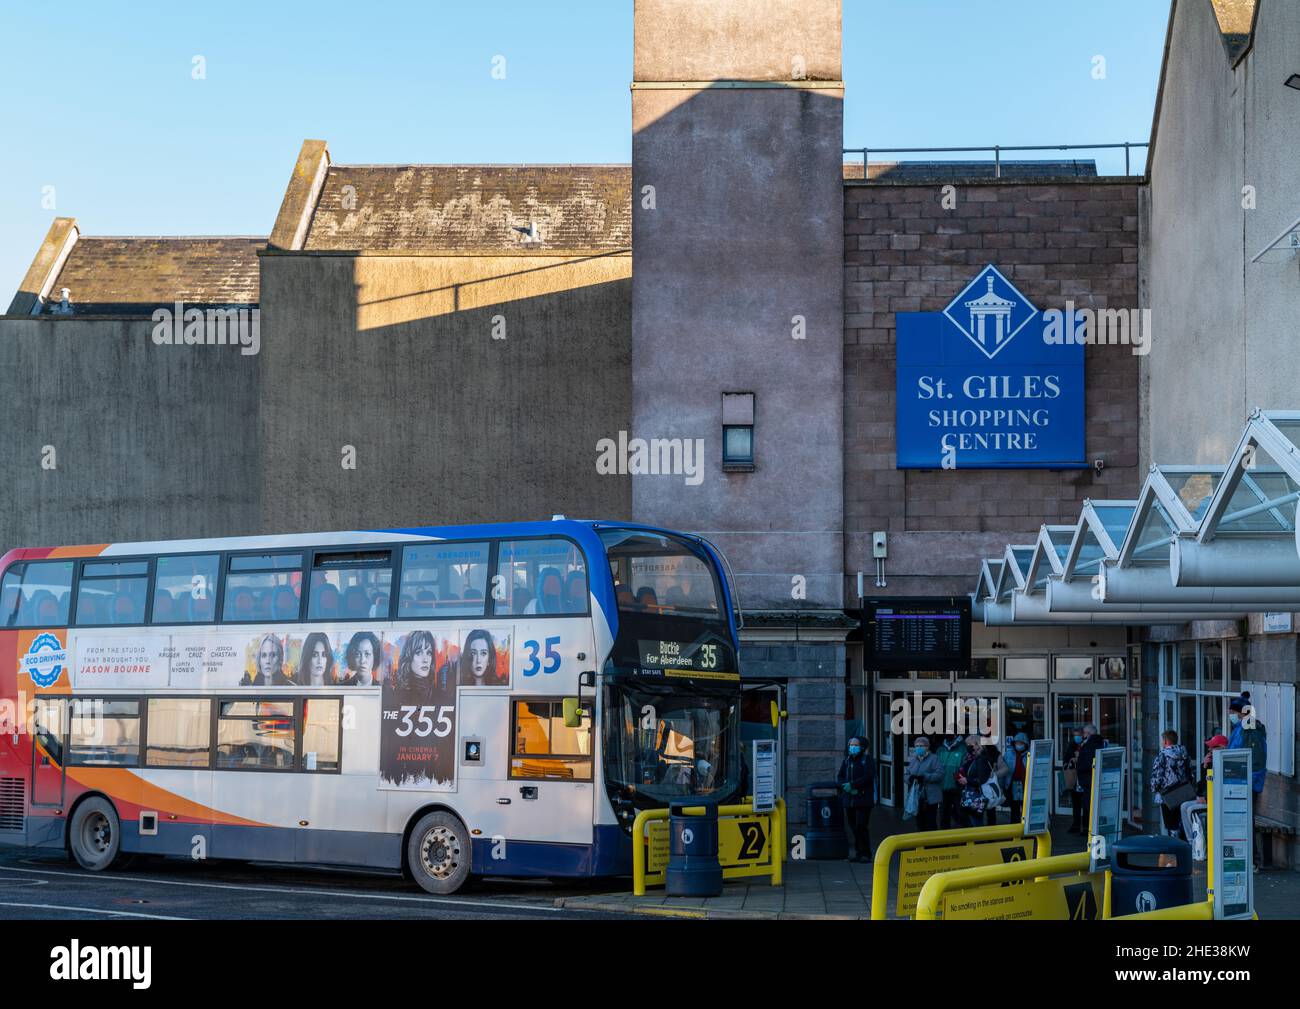 ELGIN, MORAY, SCOTLAND - 7 JANUARY 2022: - This is a view within the town centre of Elgin, Moray, Scotland on 7 January 2022 Stock Photo